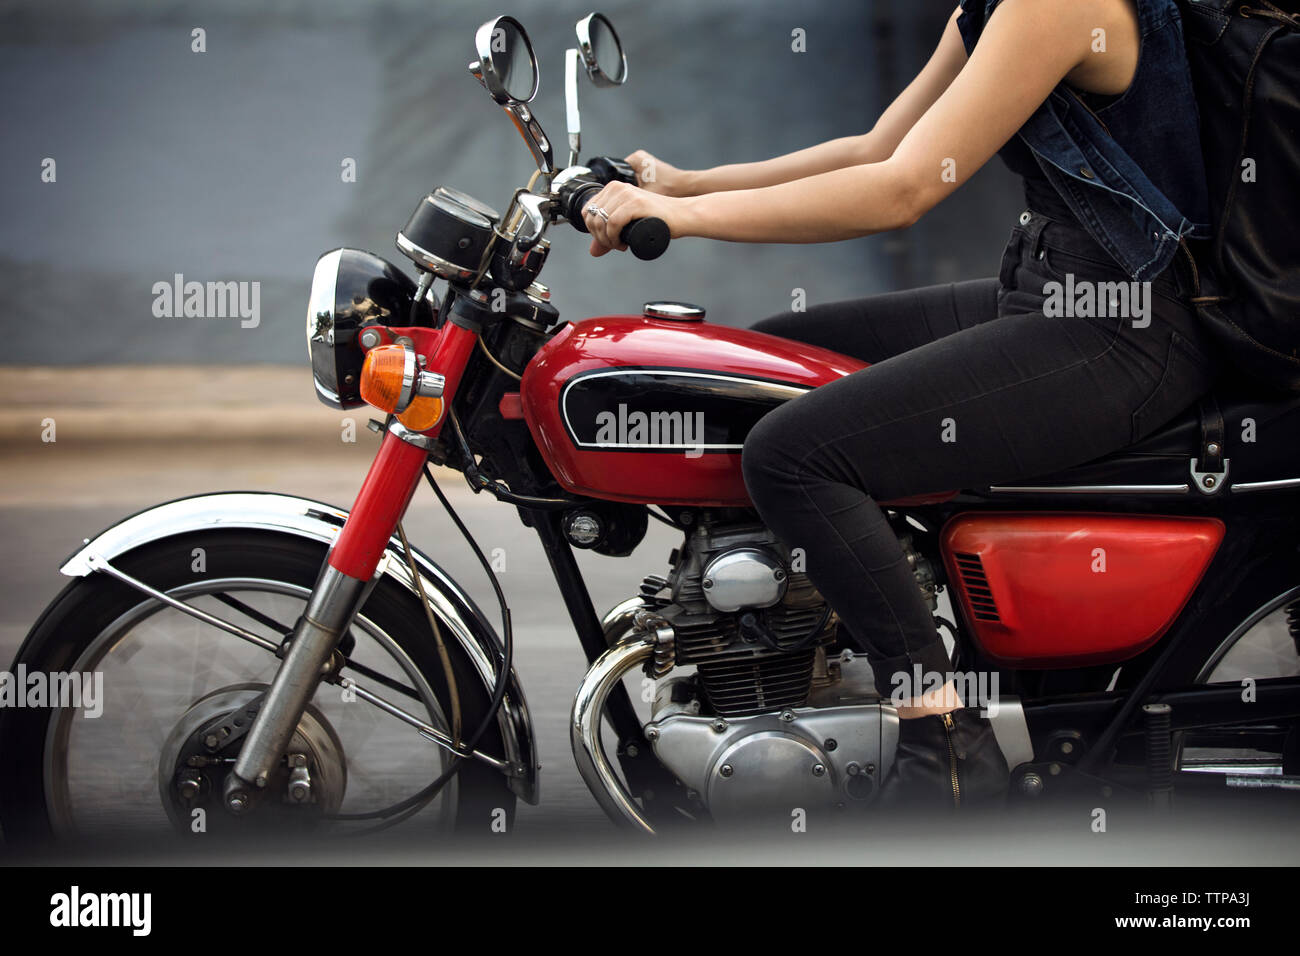 Low section of woman riding motorcycle on road Stock Photo